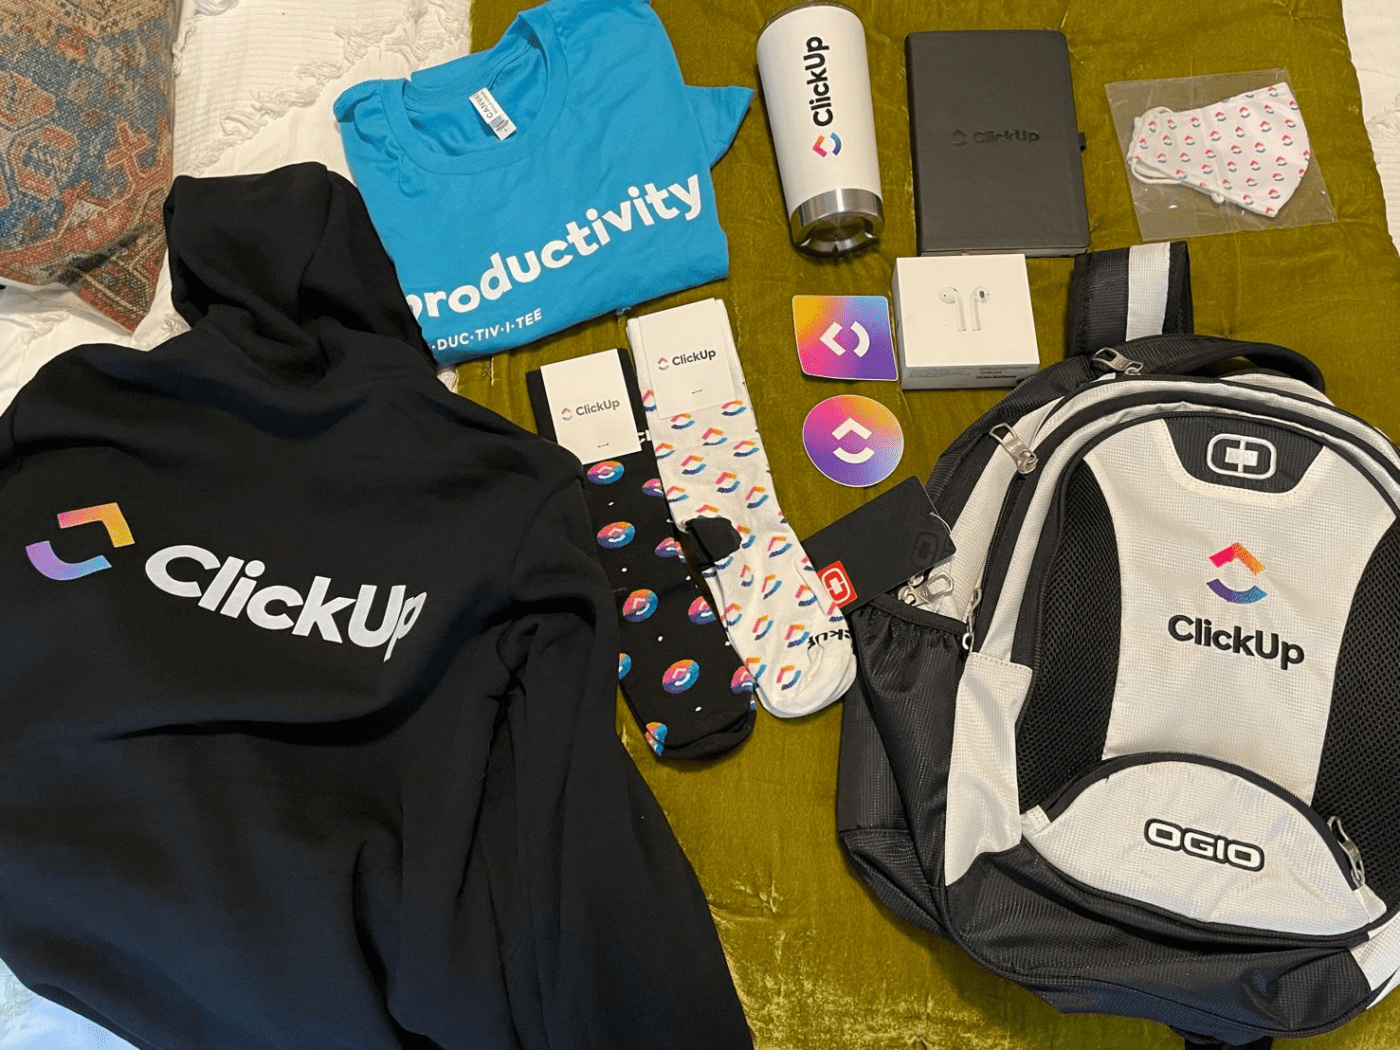 ClickUp Welcome Swag Bag